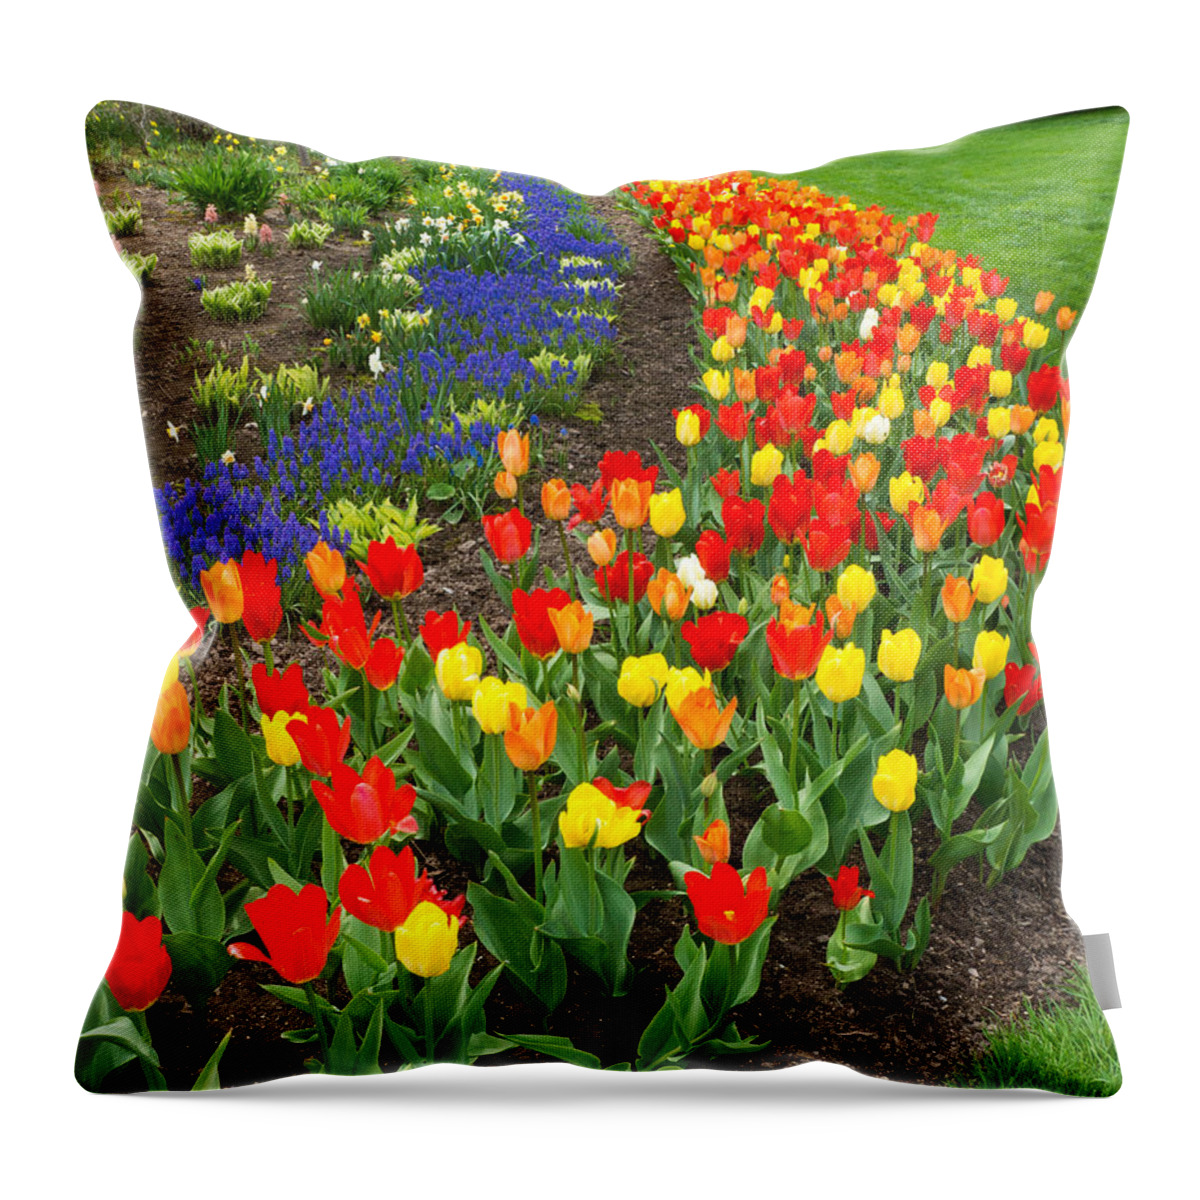 Blue Throw Pillow featuring the photograph Spring Streaming By by Bill Pevlor